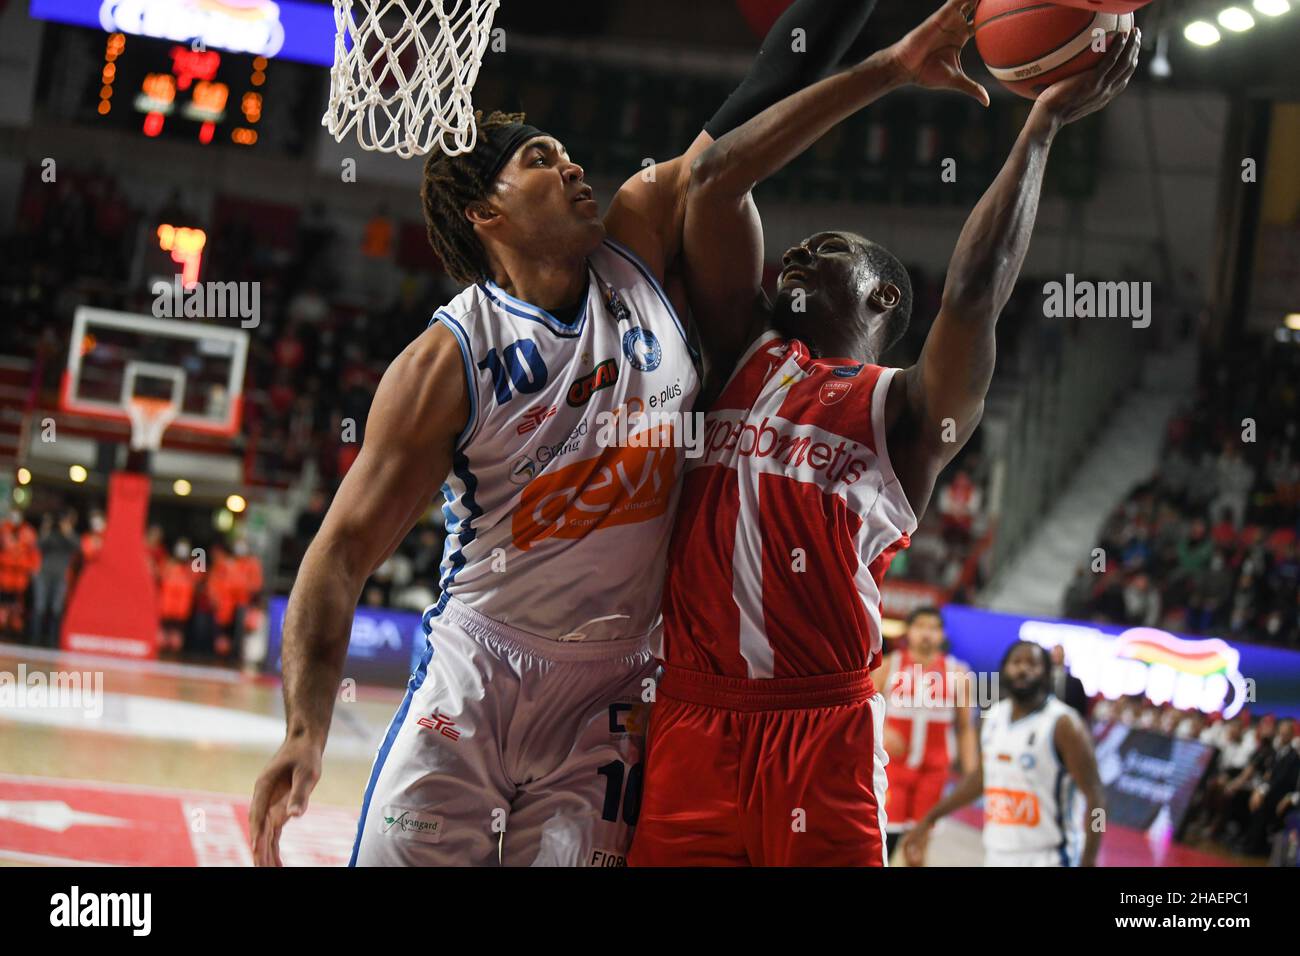 Varese, Italy. 12th Dec, 2021. 10Giovanni De Nicolao OpenJobMetis Varese during the LBA Italy Championship match between Openjobmetis Varese  vs Devi Napoli Basket, in Varese, Italy, on Dicember 12, 2021. Credit: Fabio Averna/Alamy Live News Stock Photo